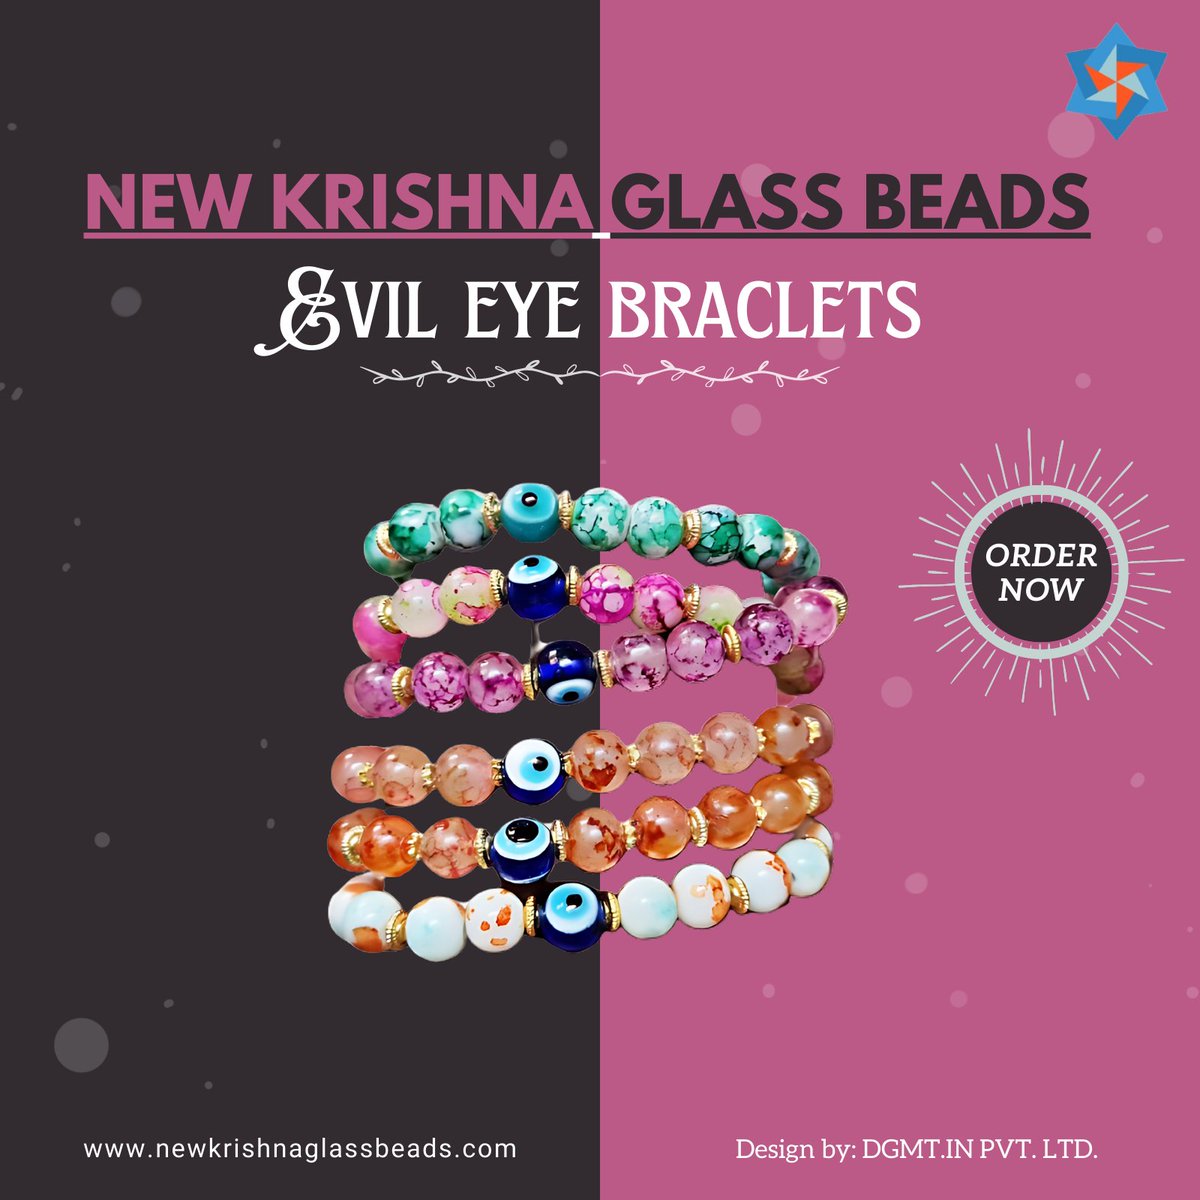 🔮✨ Keep negativity at bay with flair! Embrace our Evil Eye bracelets from New Krishna Glass Beads for both protection and adornment.

#NewKrishnaGlassBeads #EvilEyeProtection #FashionWithPurpose #EvilEyeProtection #KrishnaGlassBeads #Craftsmanship #UniqueStyle #KrishnaGlassBead